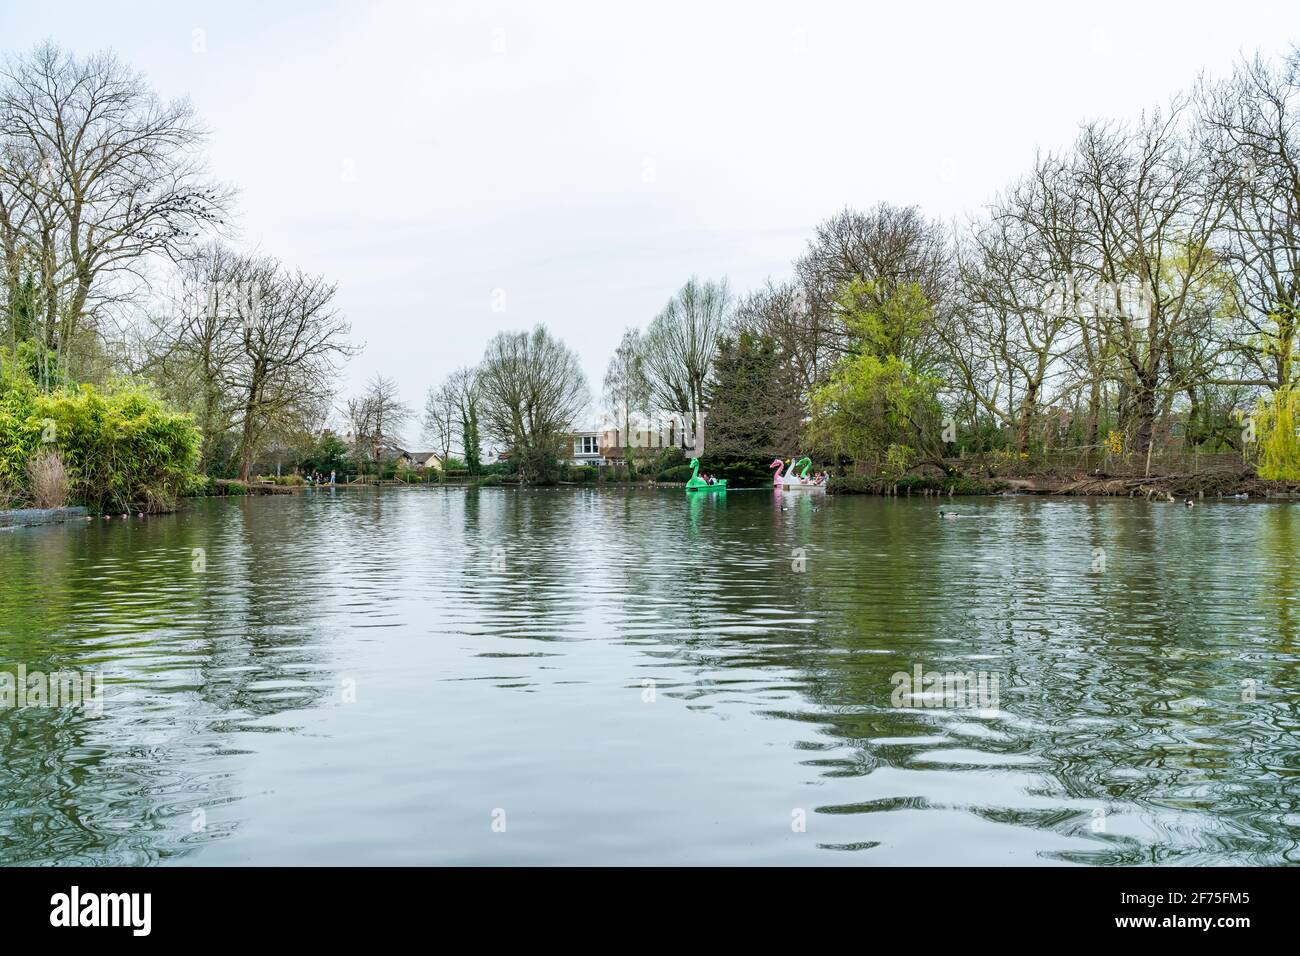 LONDON, UK - MARCH 31 2021: View of boating lake with pedal boats on at Alexandra Palace in London Stock Photo